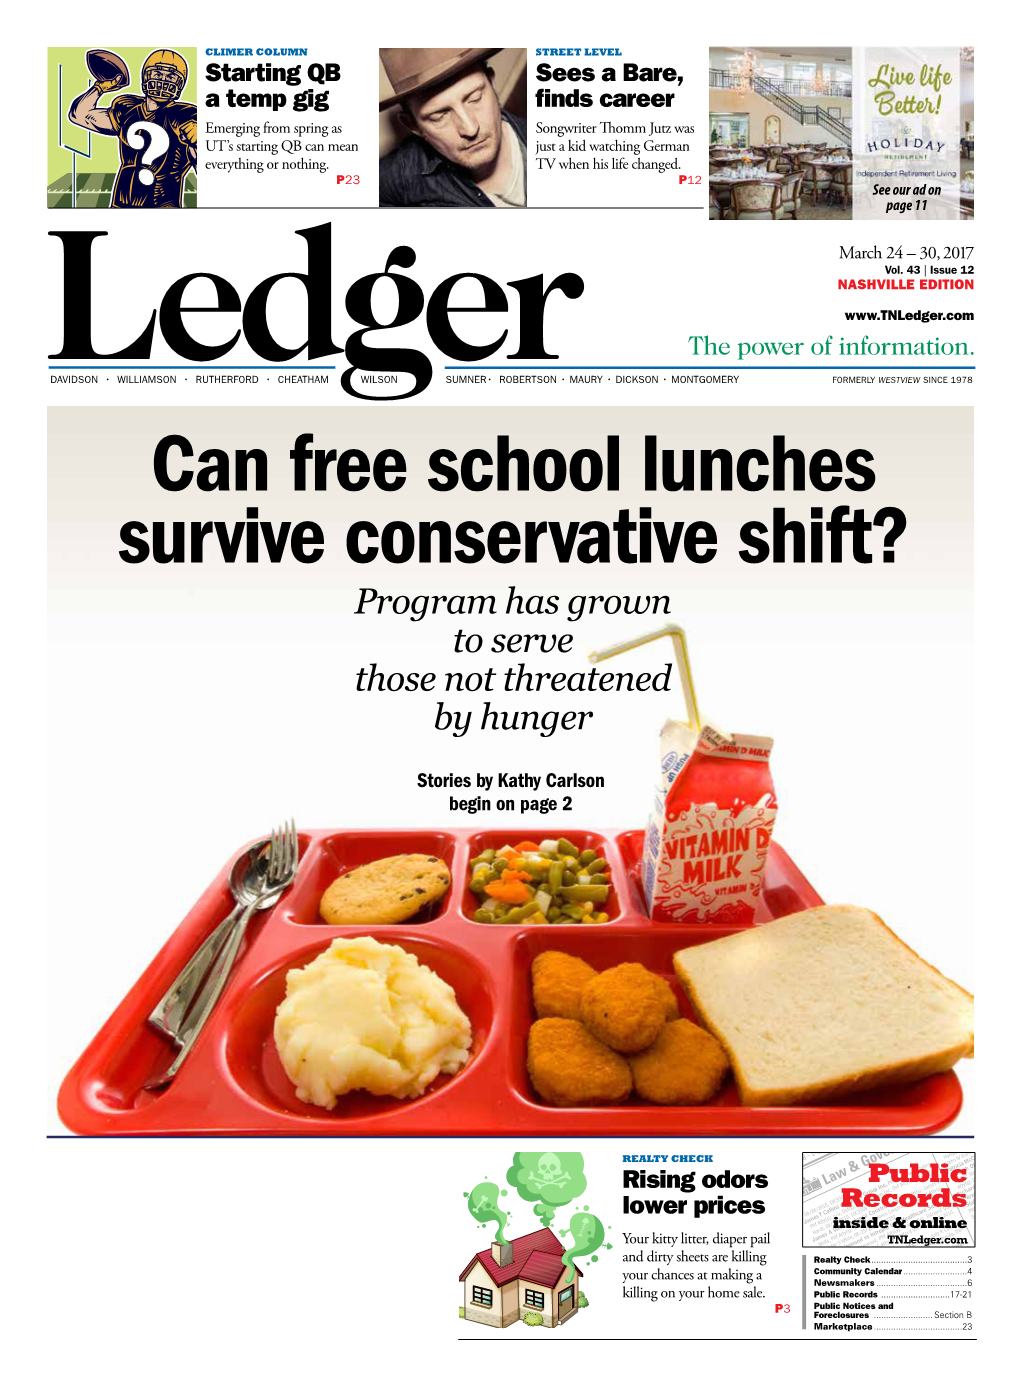 Can Free School Lunches Survive Conservative Shift? Program Has Grown to Serve Those Not Threatened by Hunger